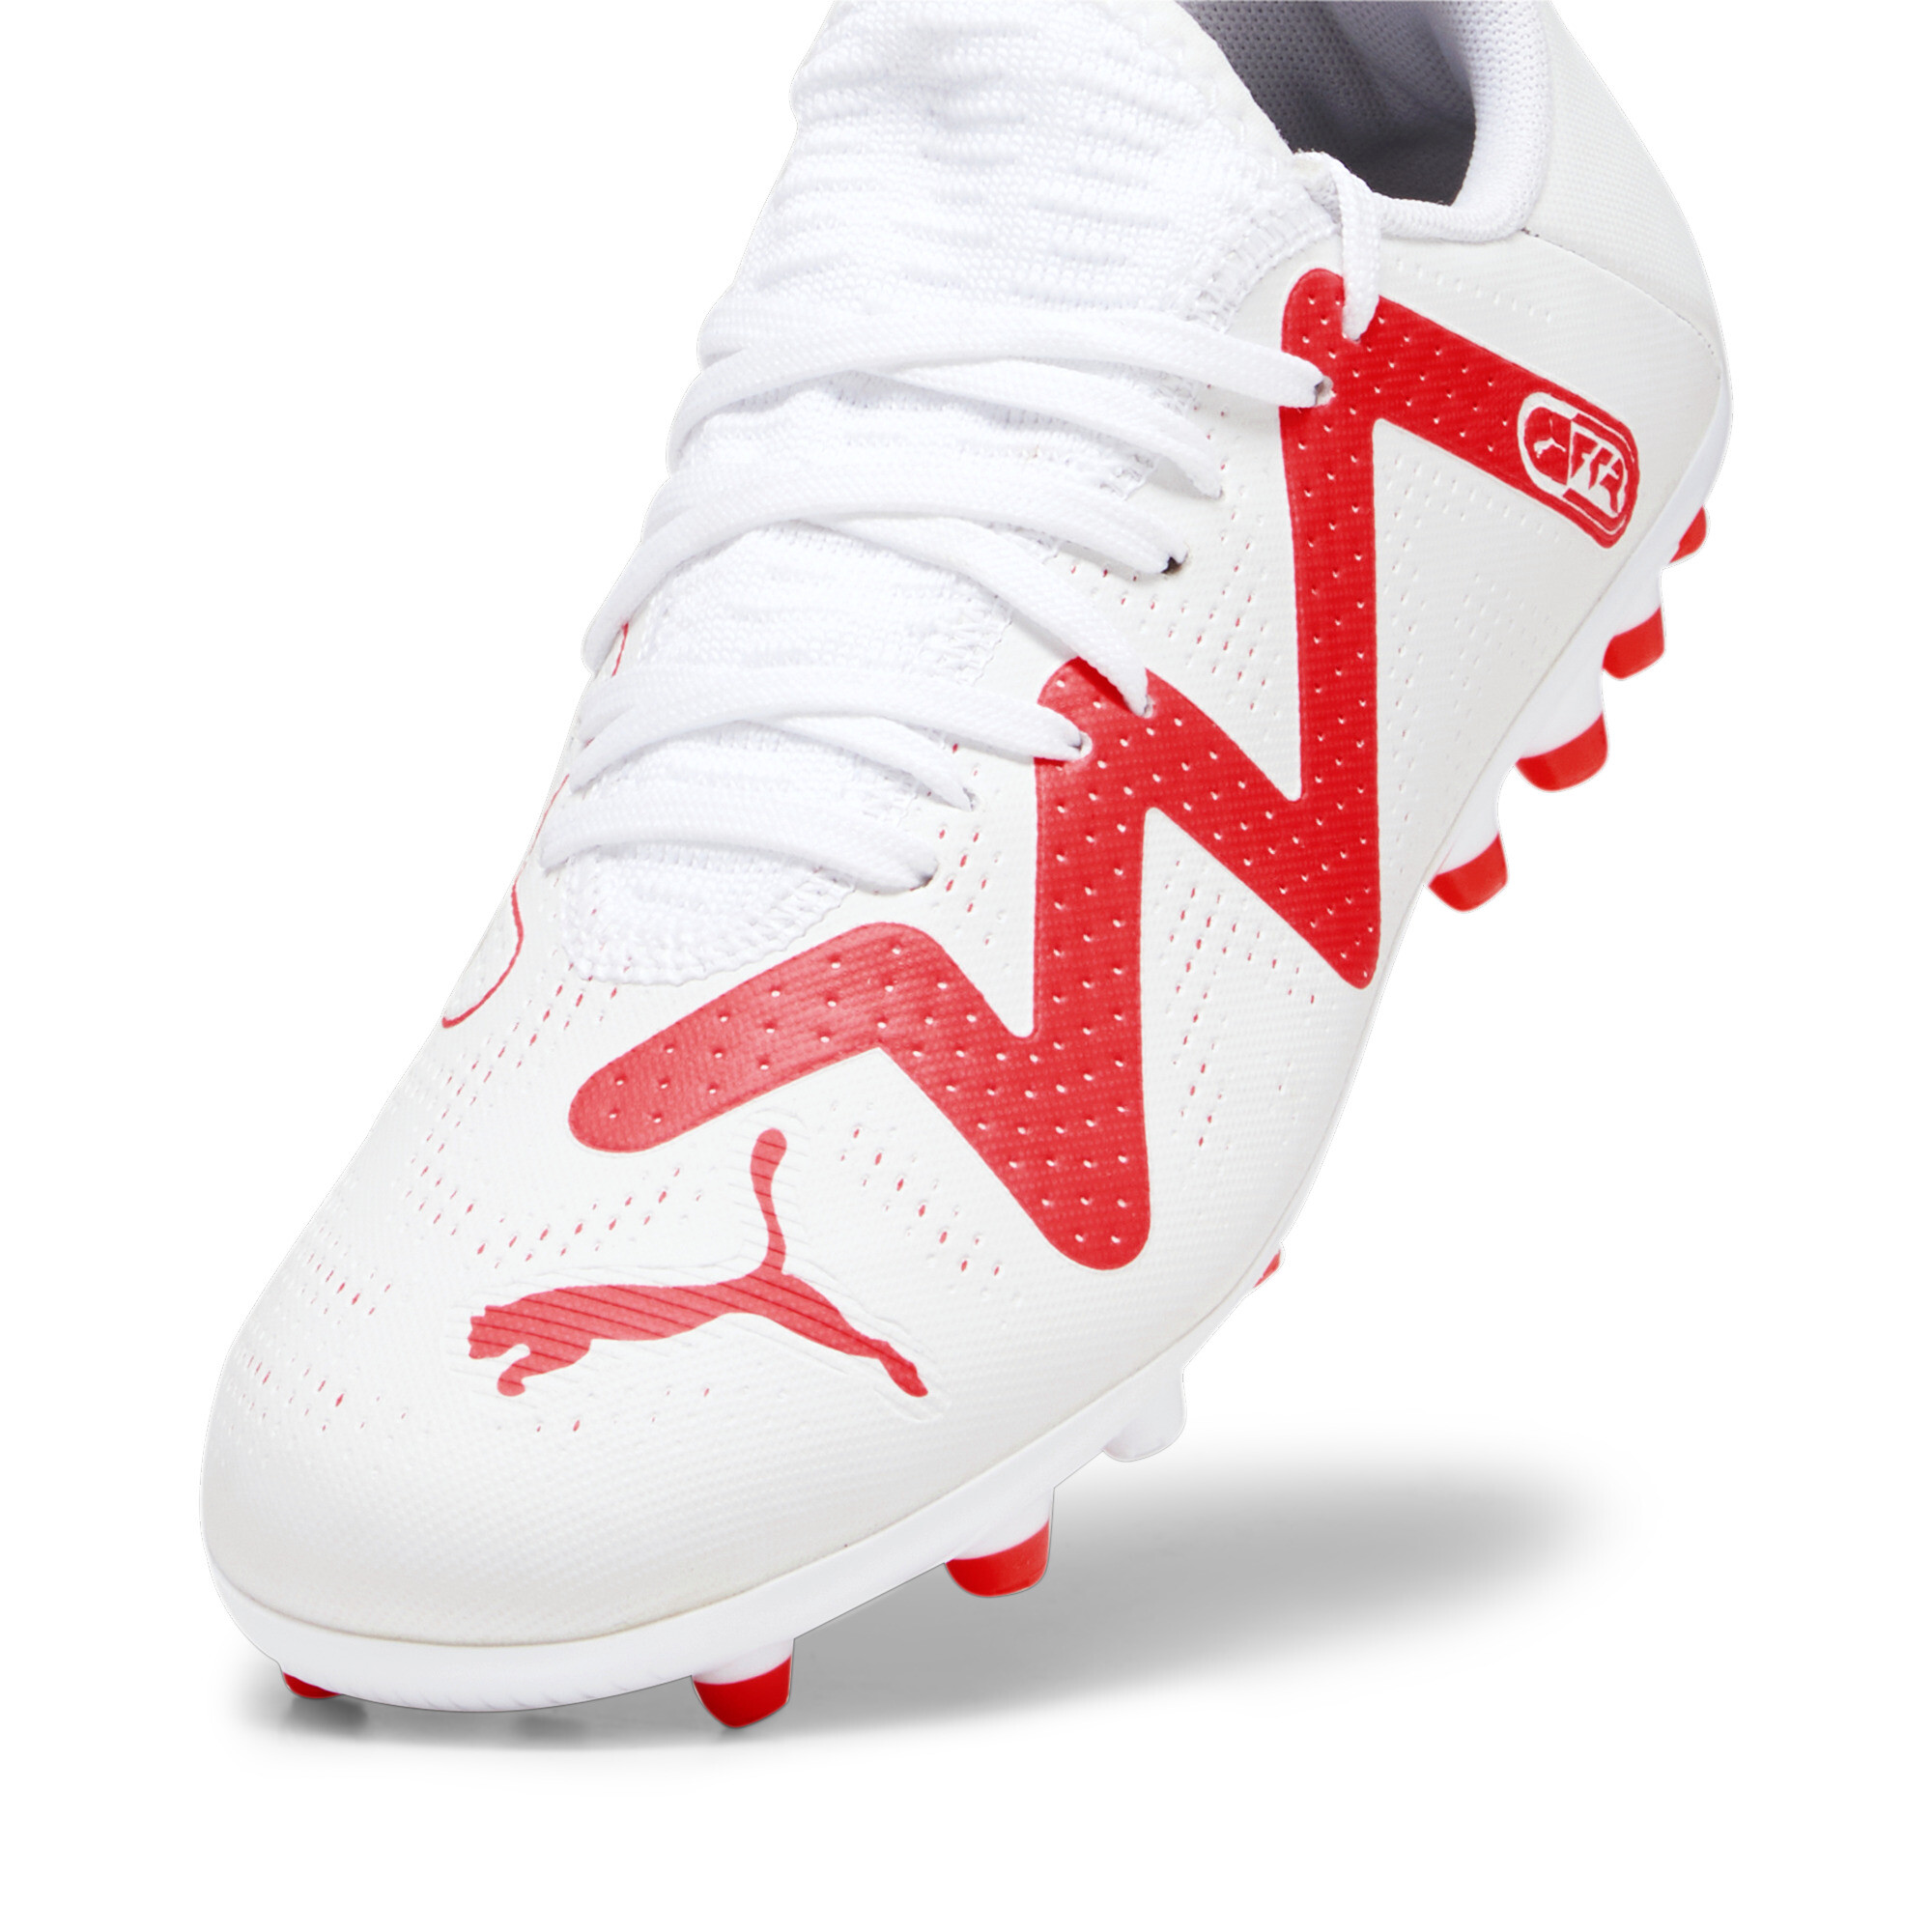 Puma FUTURE PLAY MG Youth Football Boots, White, Size 31, Shoes